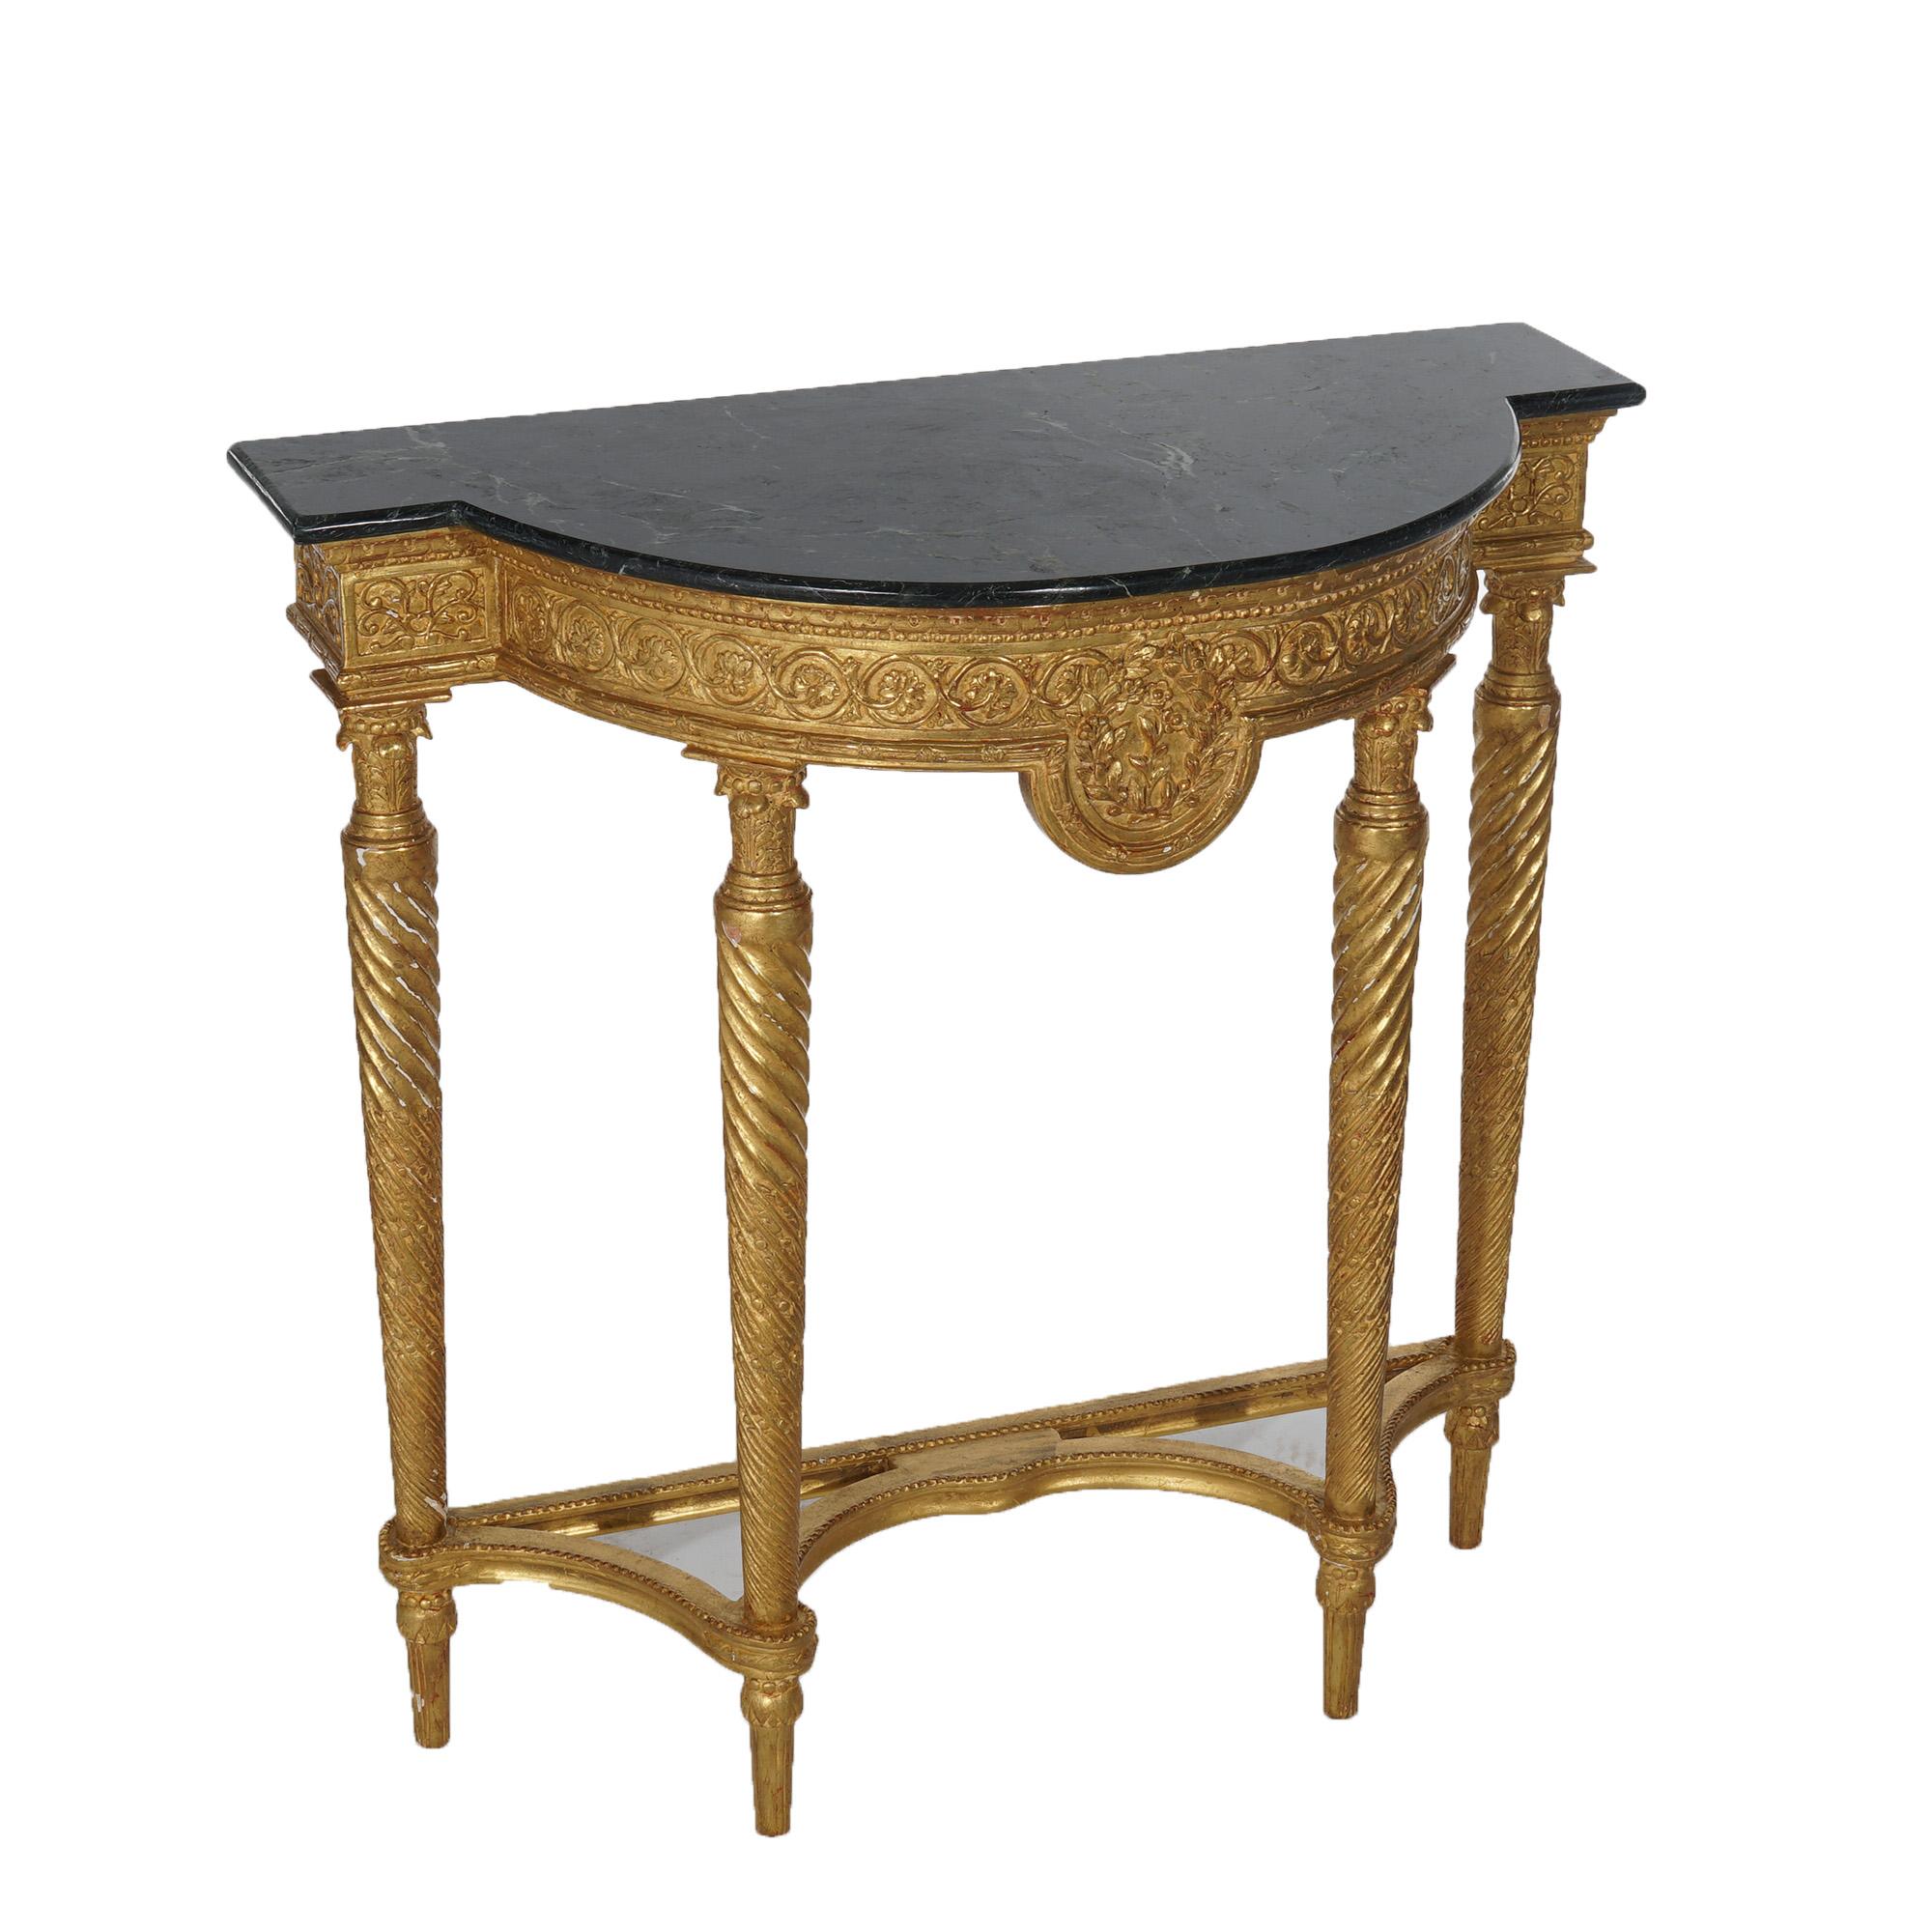 ***Ask About Reduced In-House Shipping Rates - Reliable Service & Fully Insured***
An antique French Louis XVI style hall table offers stylized demilune form with marble top over giltwood base having scroll and foliate elements, raised on tapered